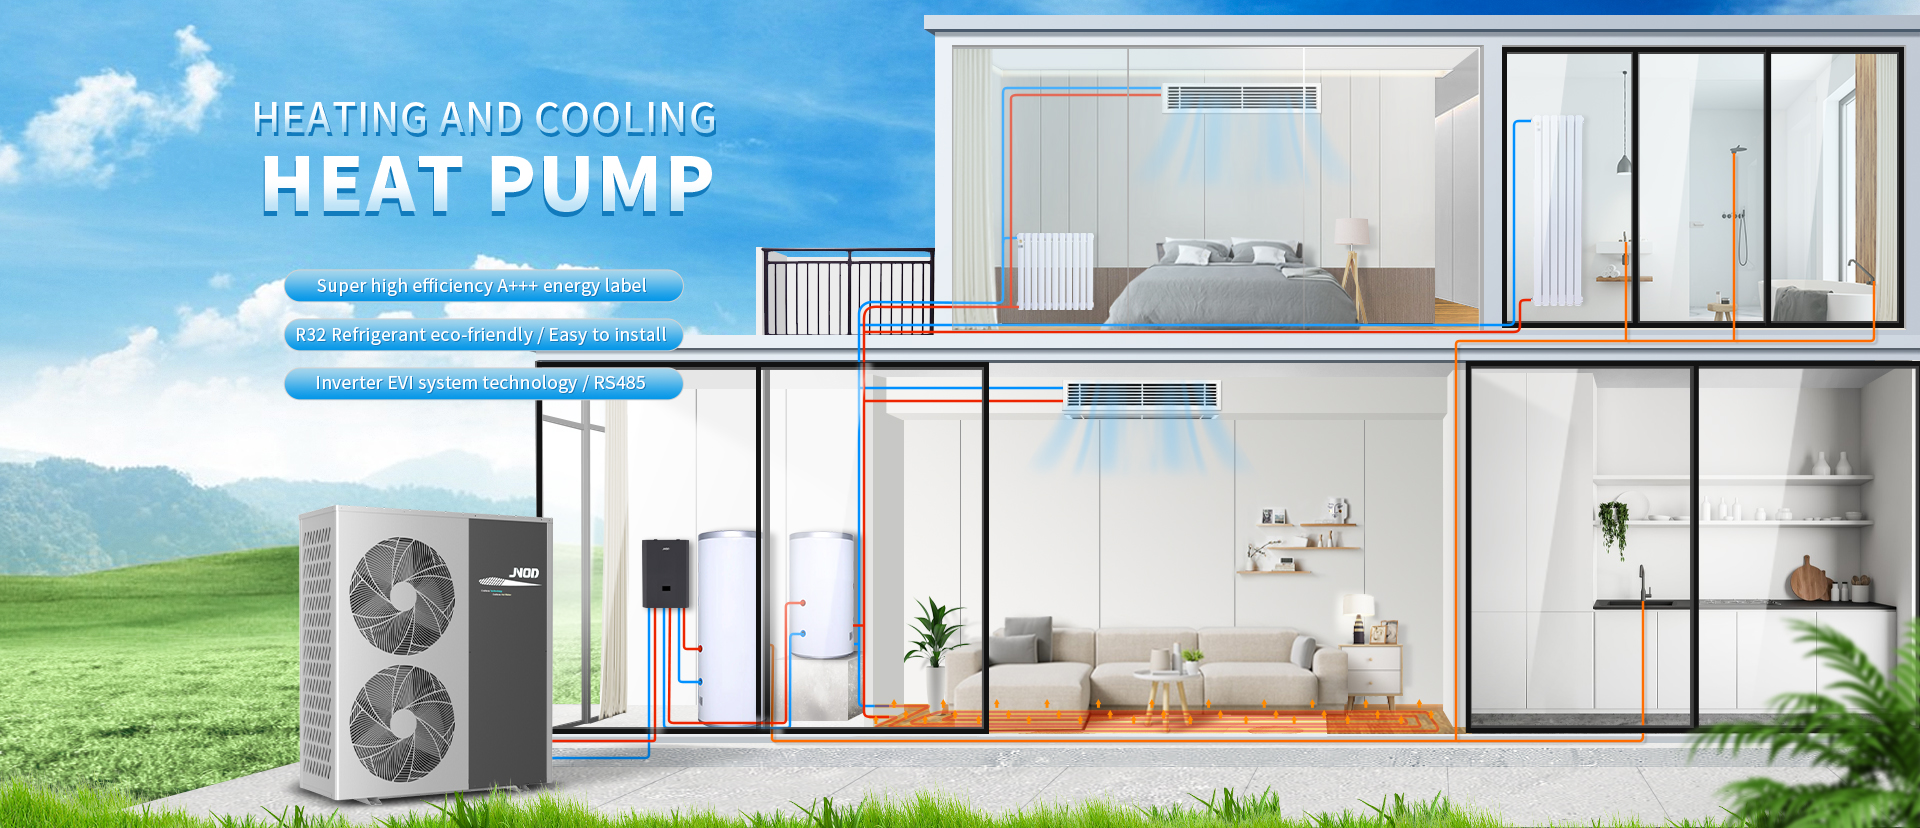 Air Cooled Wifi Heating And Cooling Heat Pump